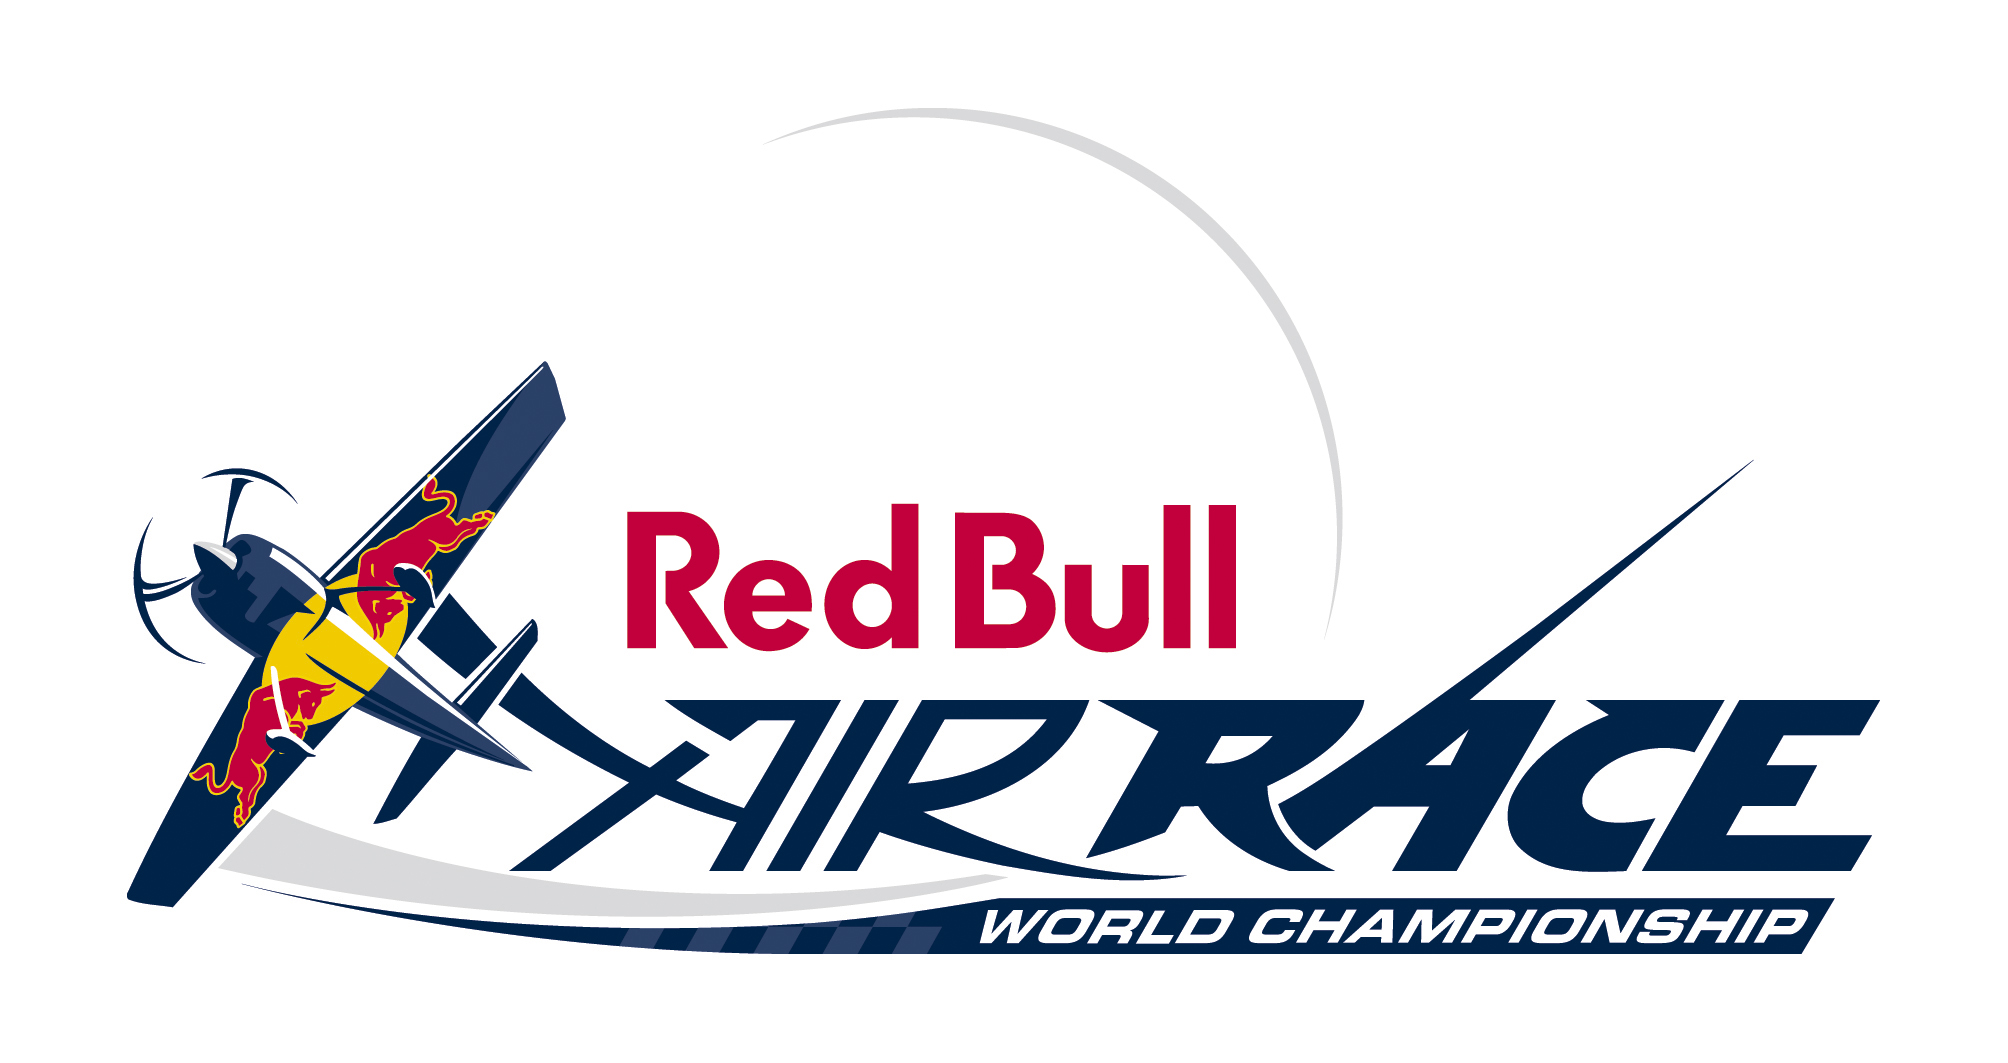 red bull air race, Airplane, Plane, Race, Racing, Red, Bull, Aircraft, Poster Wallpaper